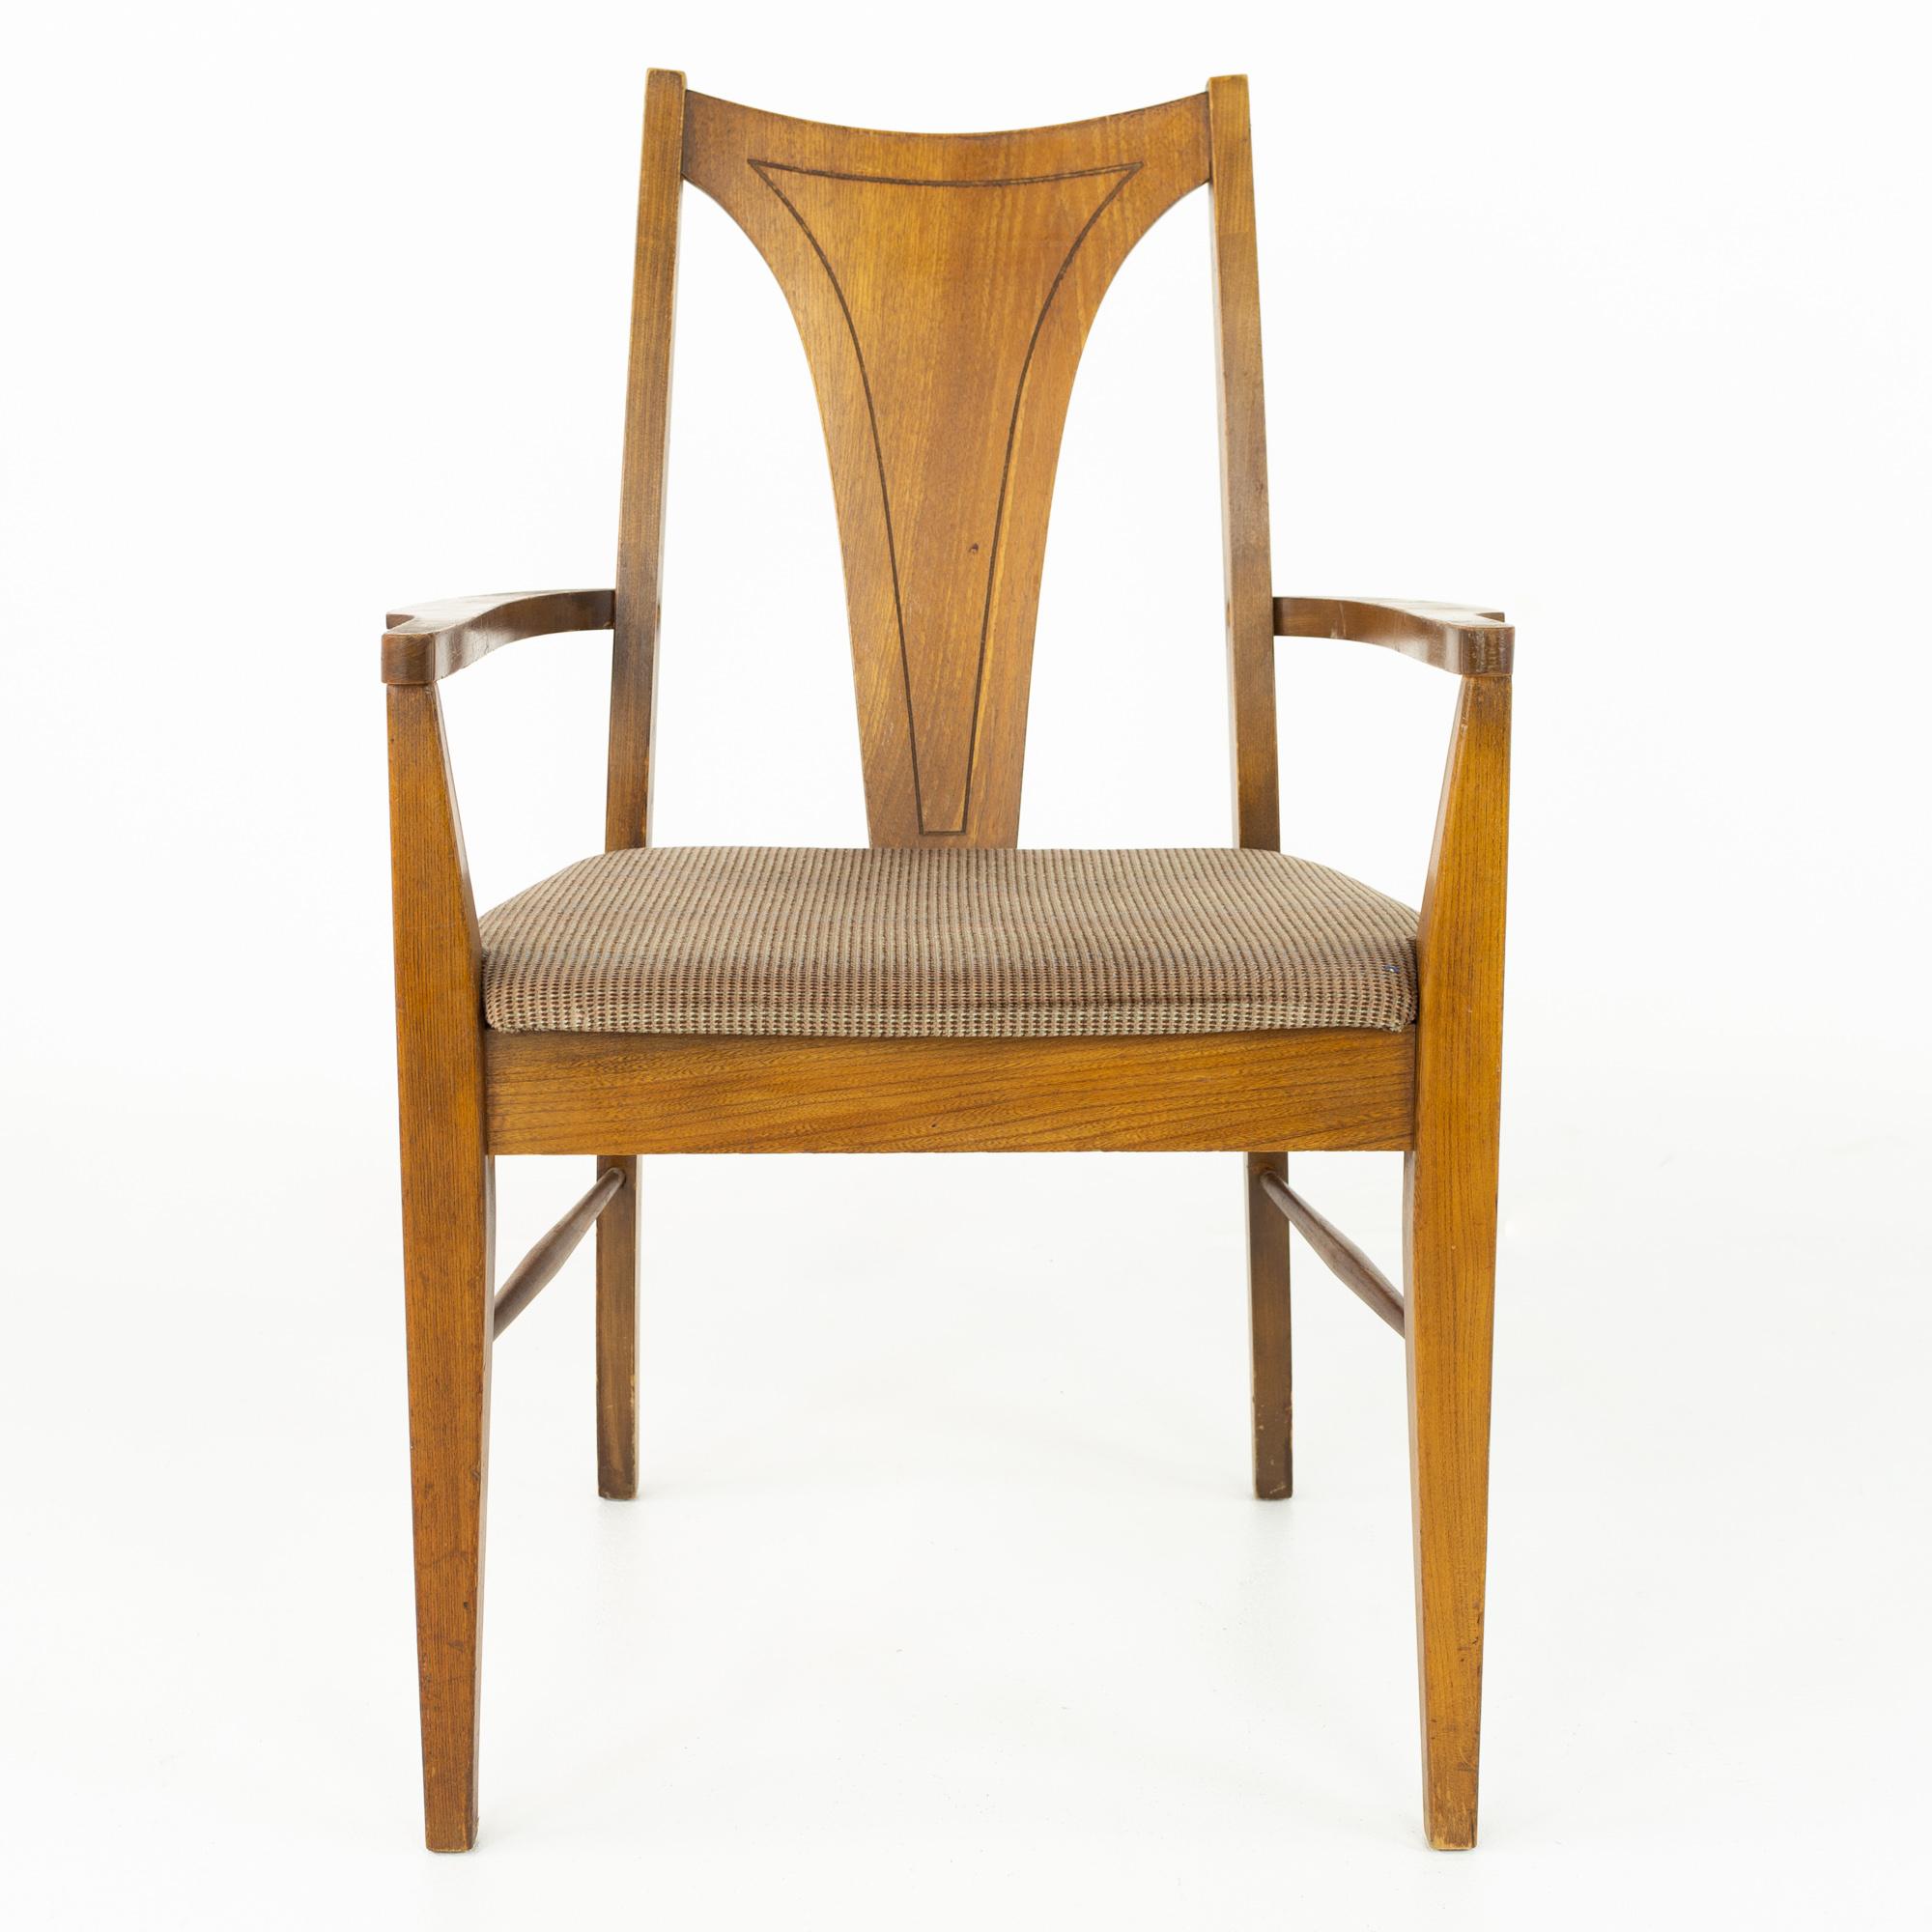 Kent Coffey Perspecta Mid Century Walnut Dining Chairs, Set of 6 In Good Condition For Sale In Countryside, IL